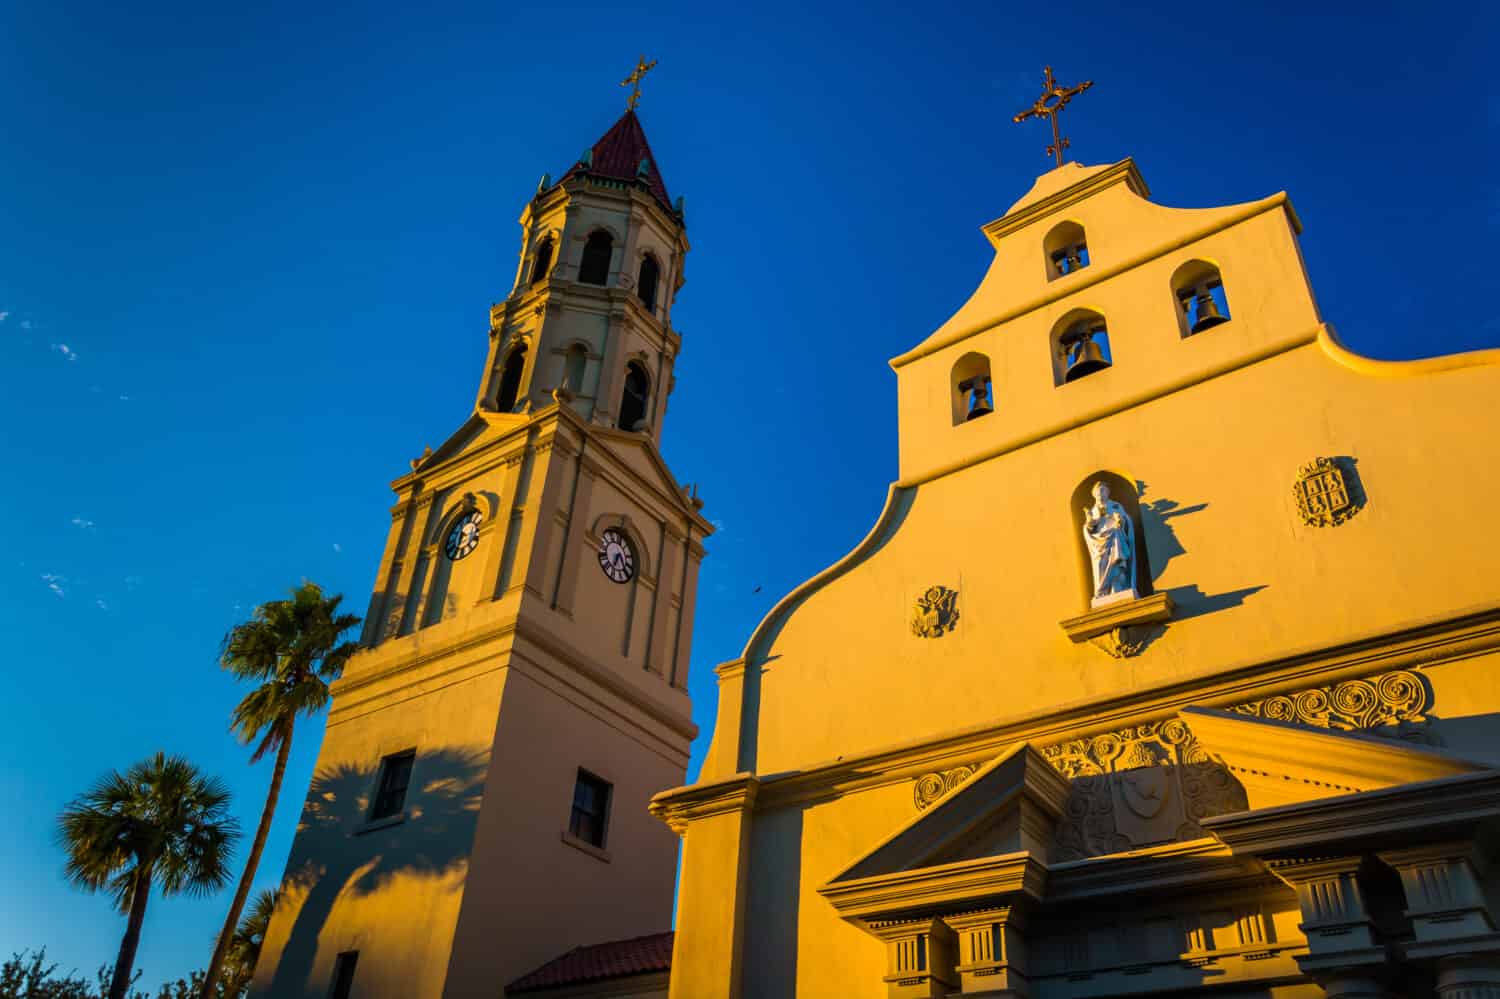 Evening light on the Cathedral Basilica in St. Augustine, Florida.